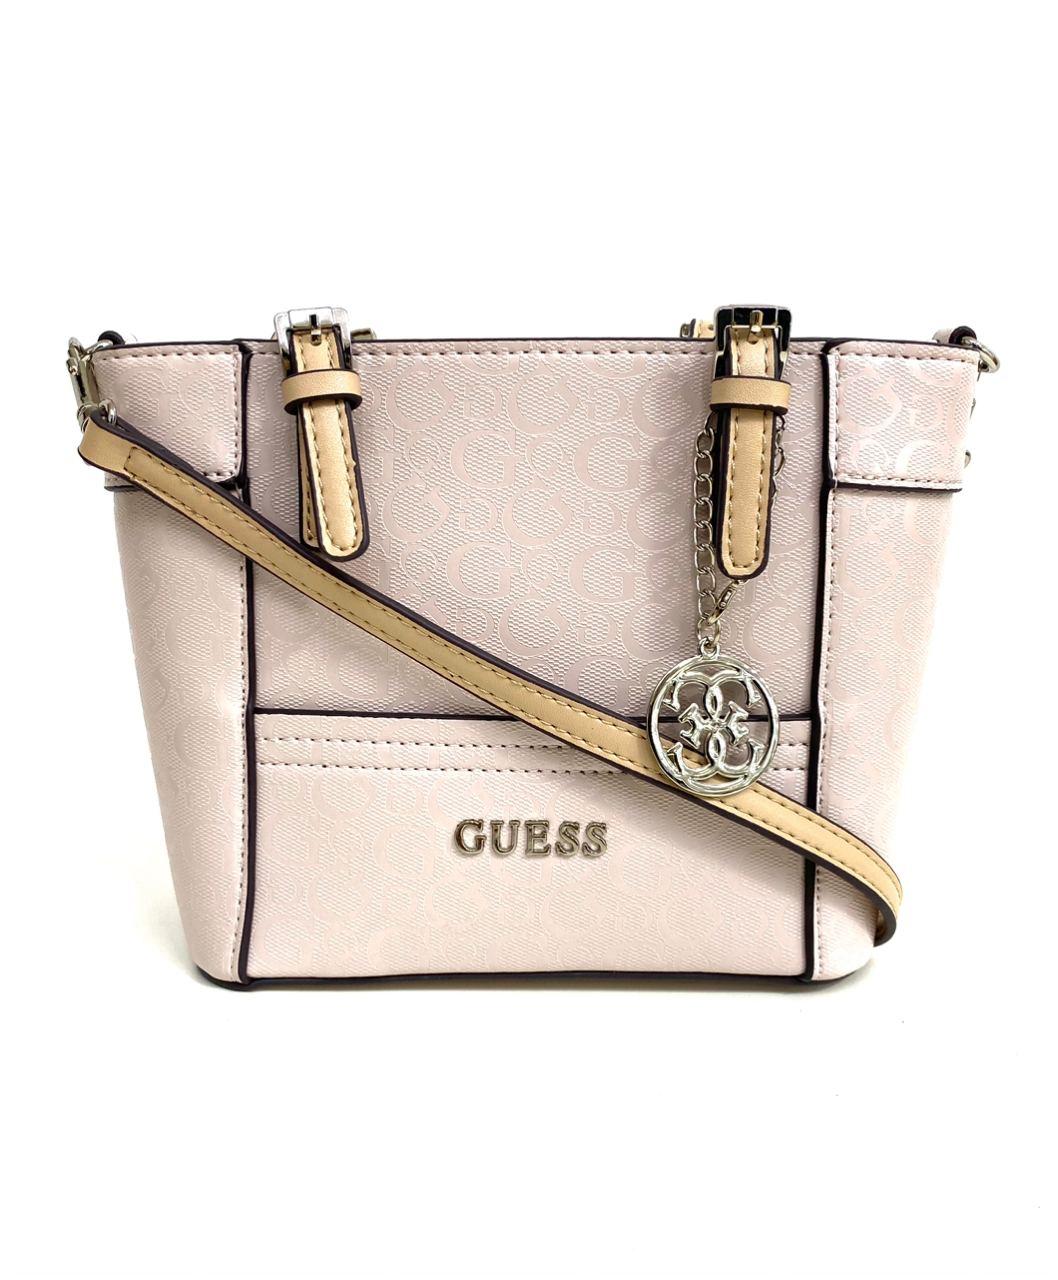 Guess Guess Bag For Women,Gold - Tote Bags price in Egypt, Jumia Egypt